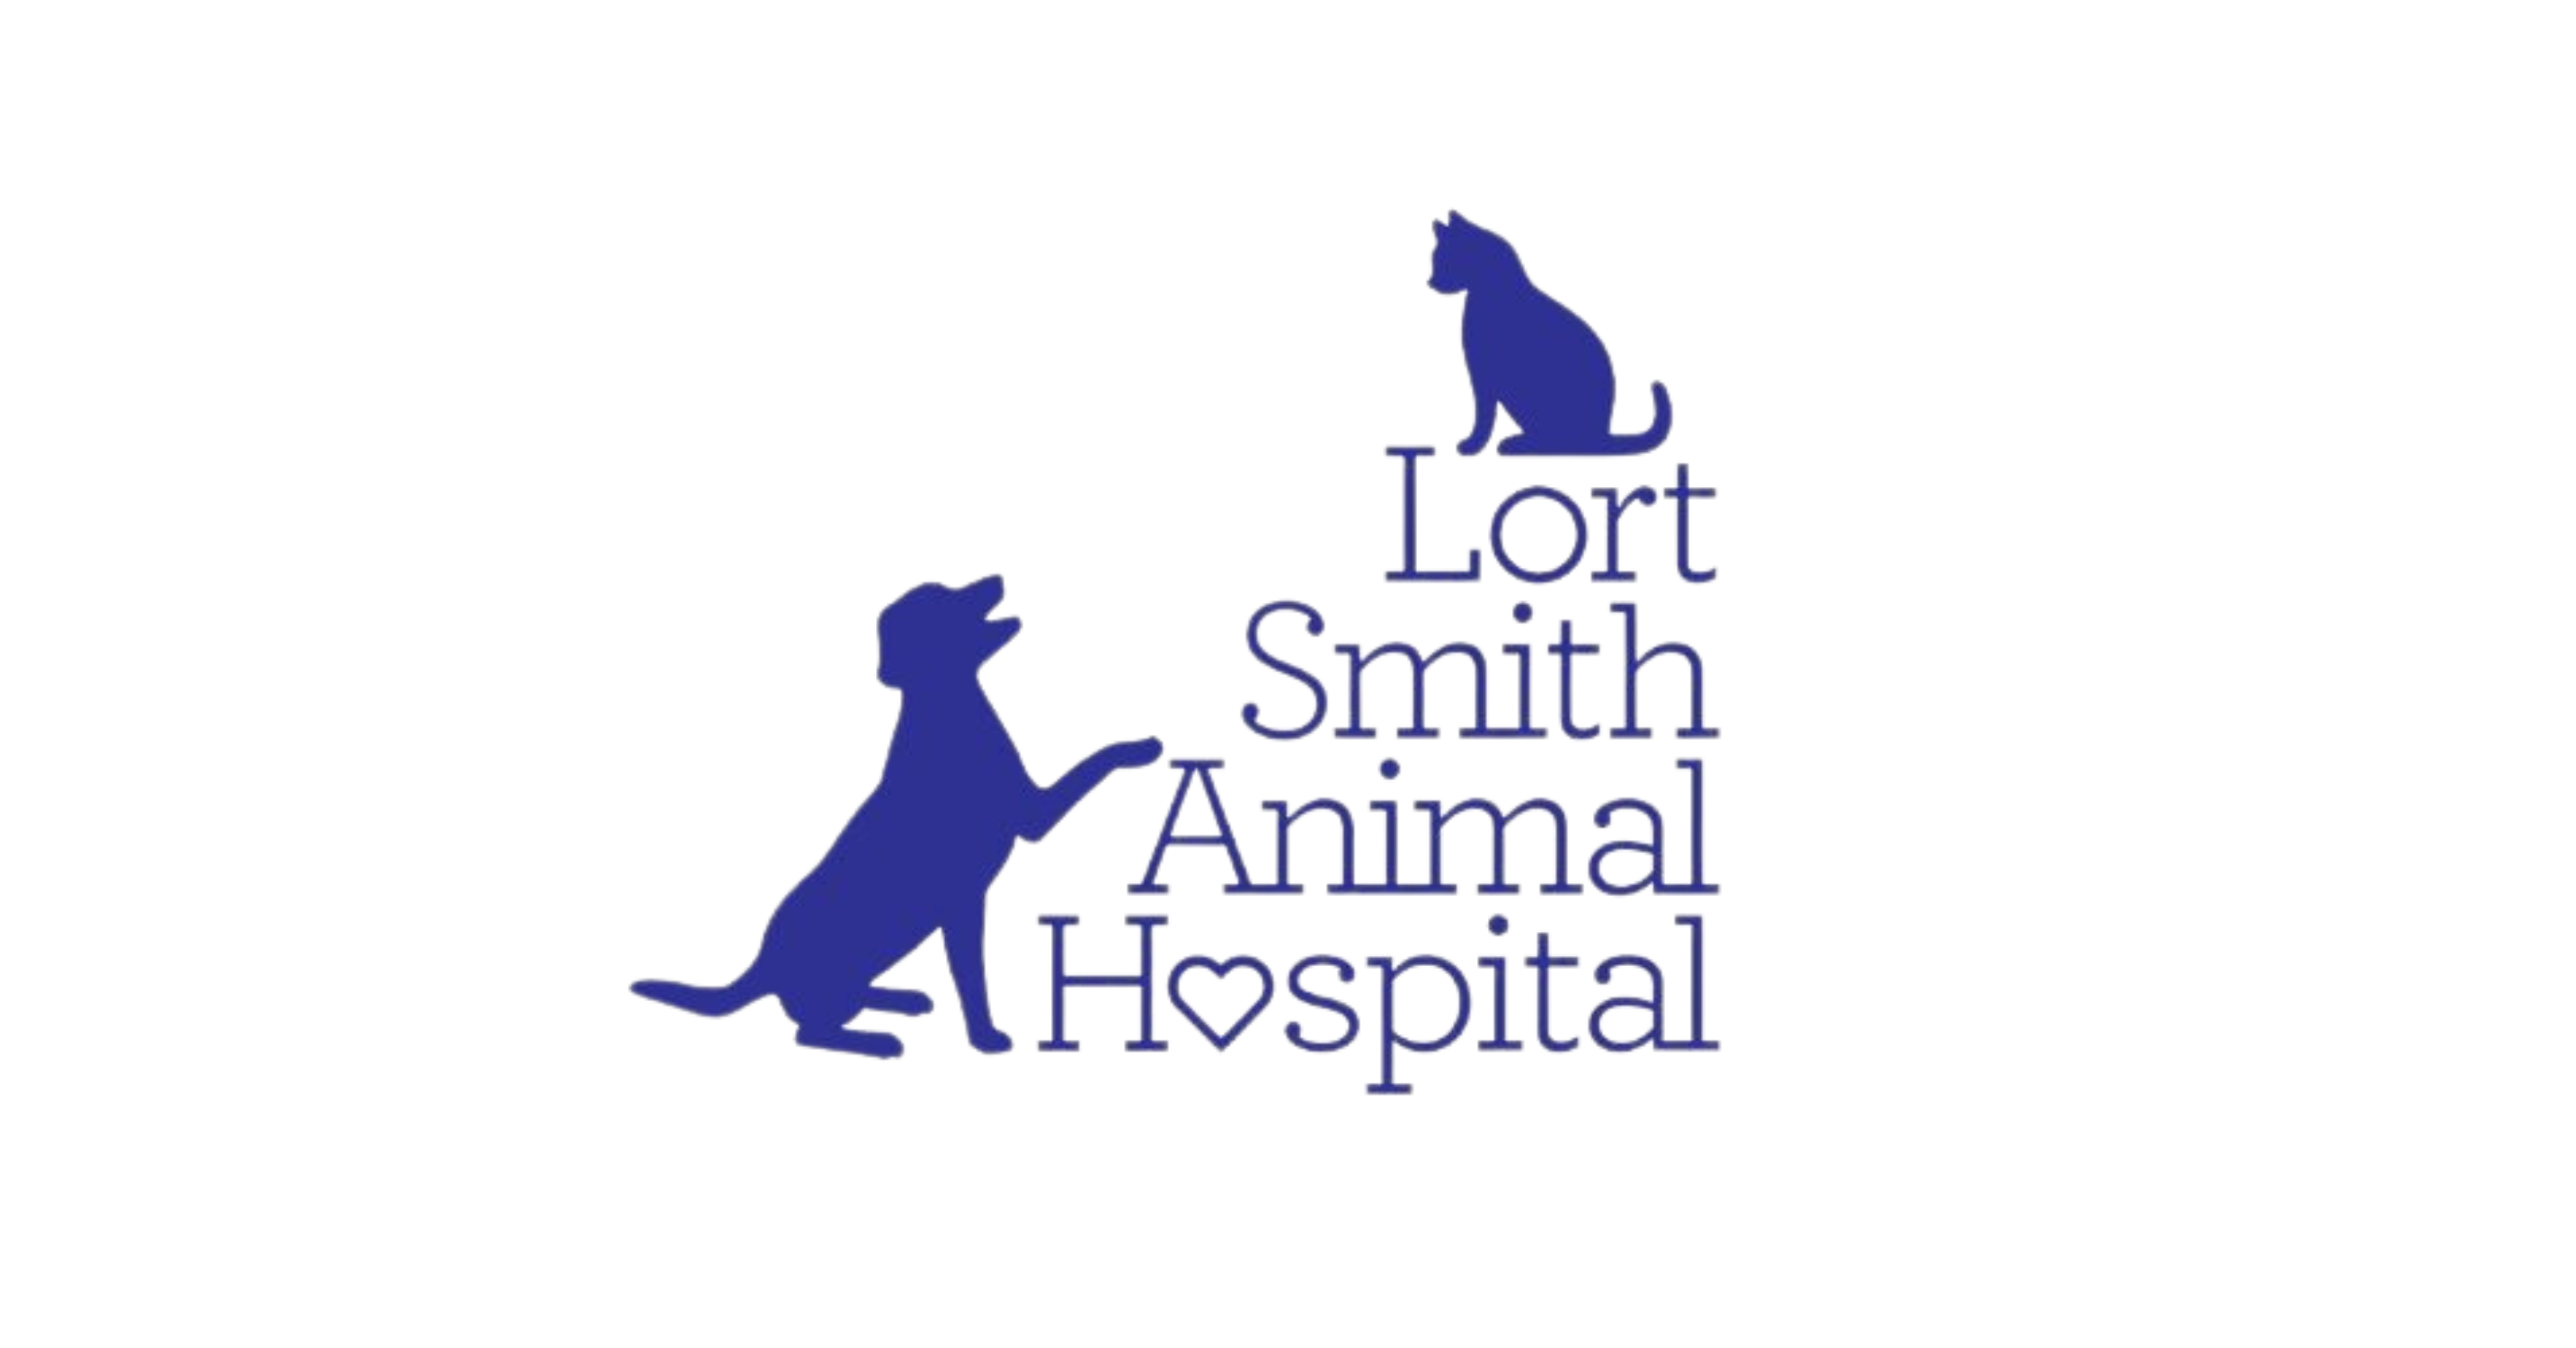 Lort Smith Animal Hospital logo, supported by Integris Group Services